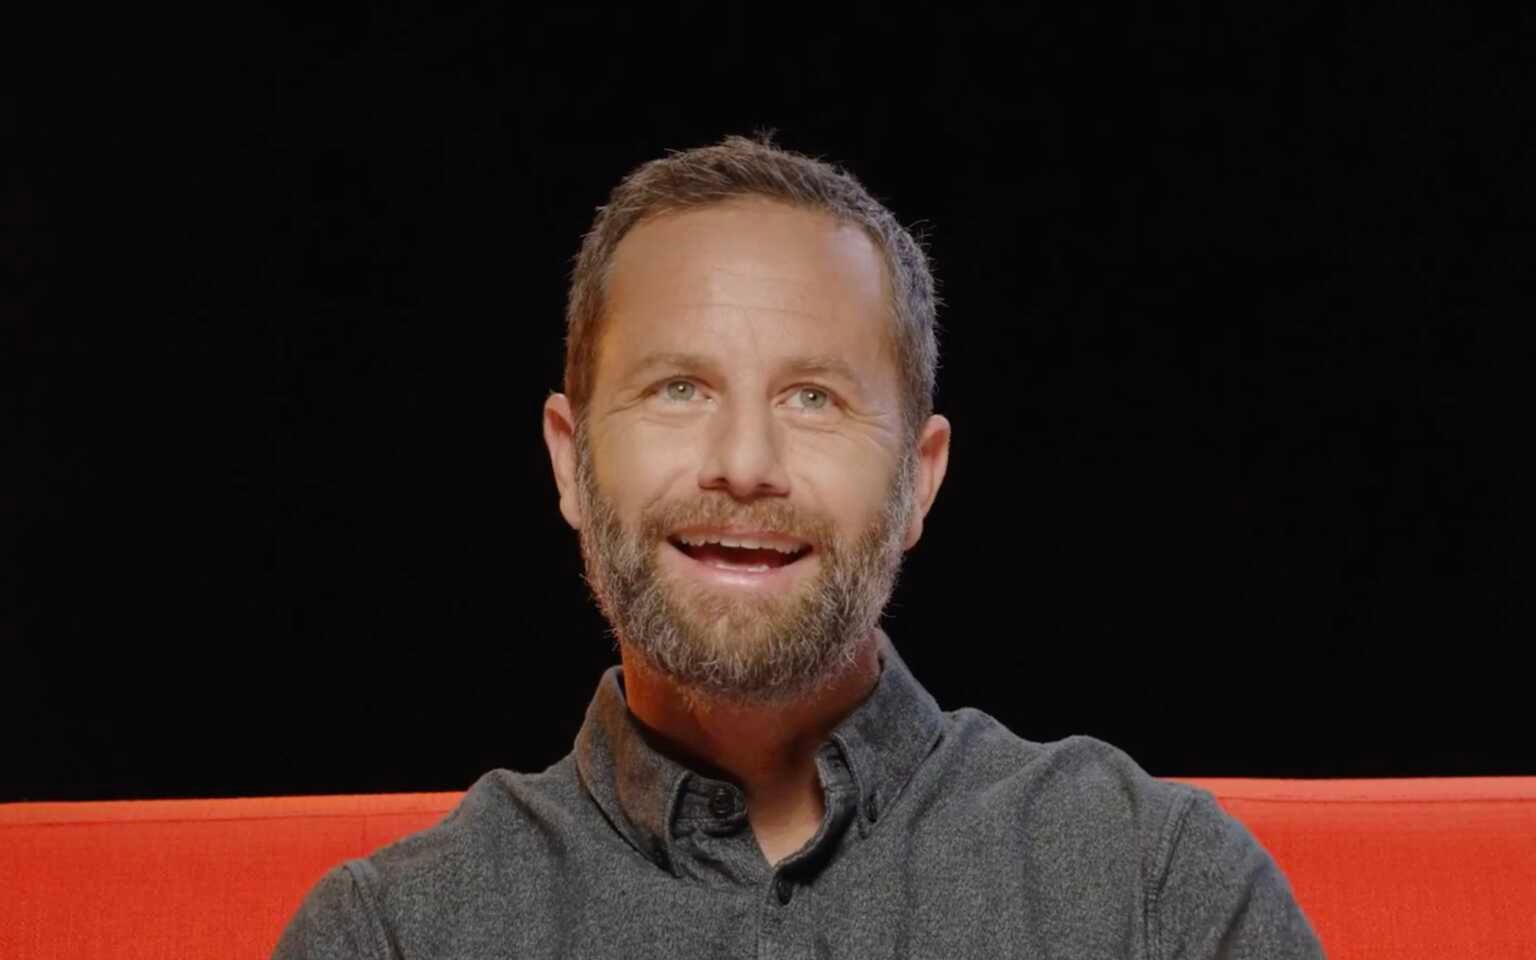 'I Want to Use My Platform … to Advance the Good' Kirk Cameron Details